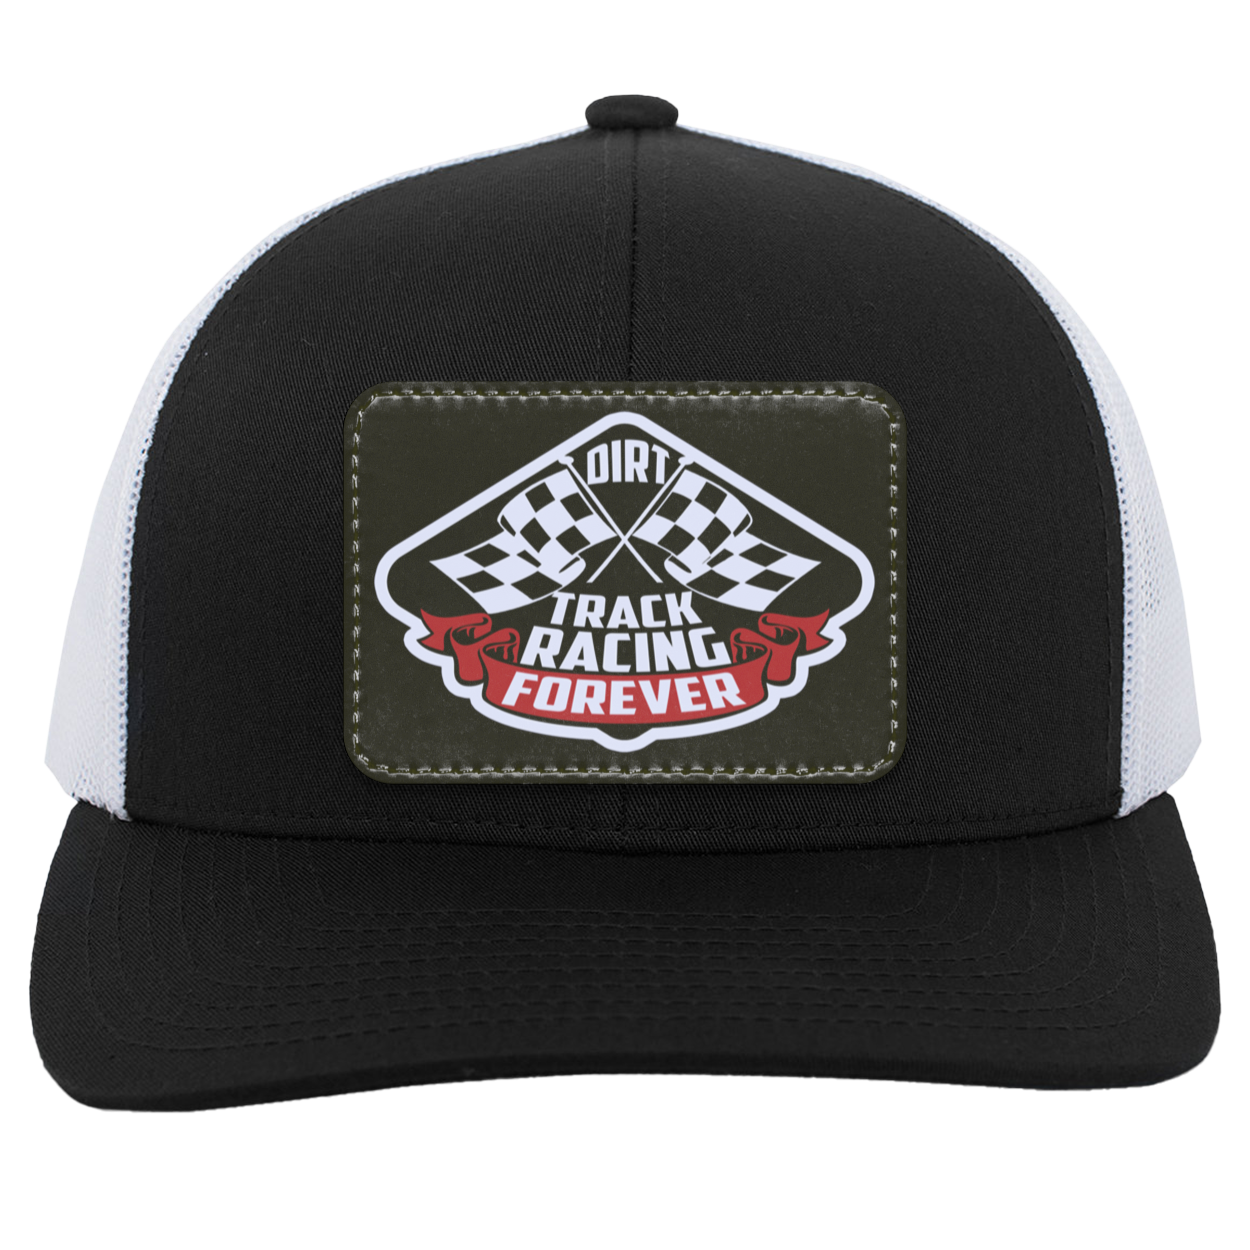 Dirt Track Racing Forever Trucker Patched Snap Back